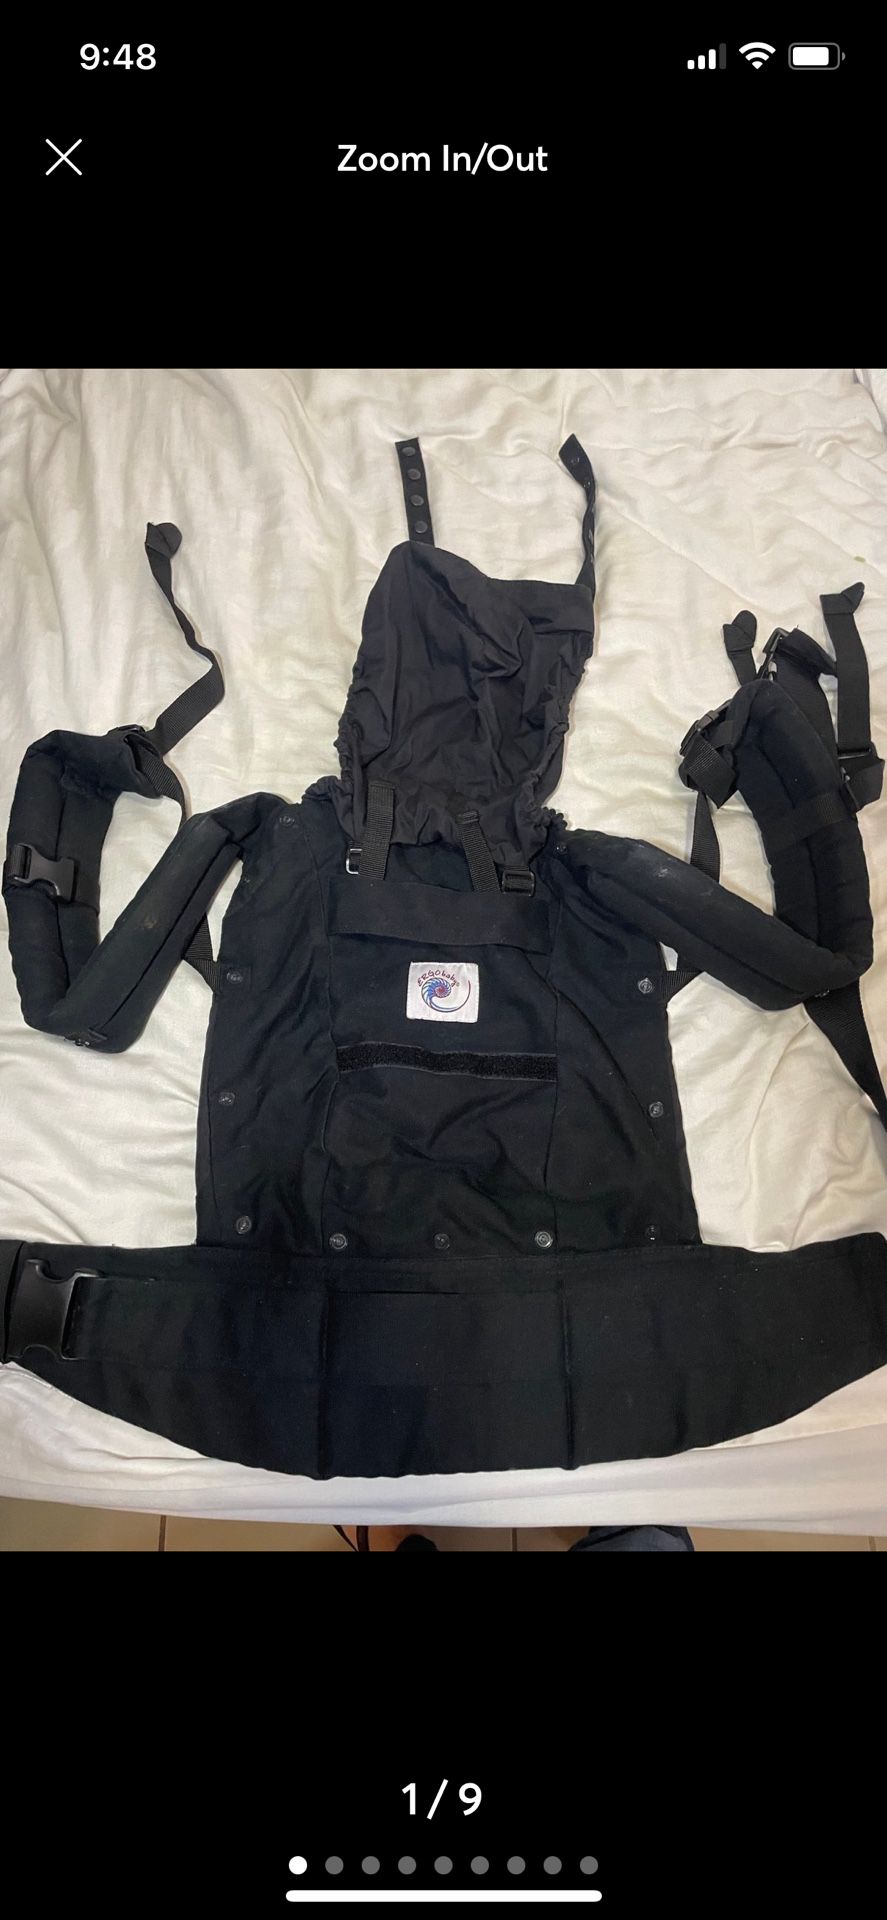 Ergobaby carrier and infant insert